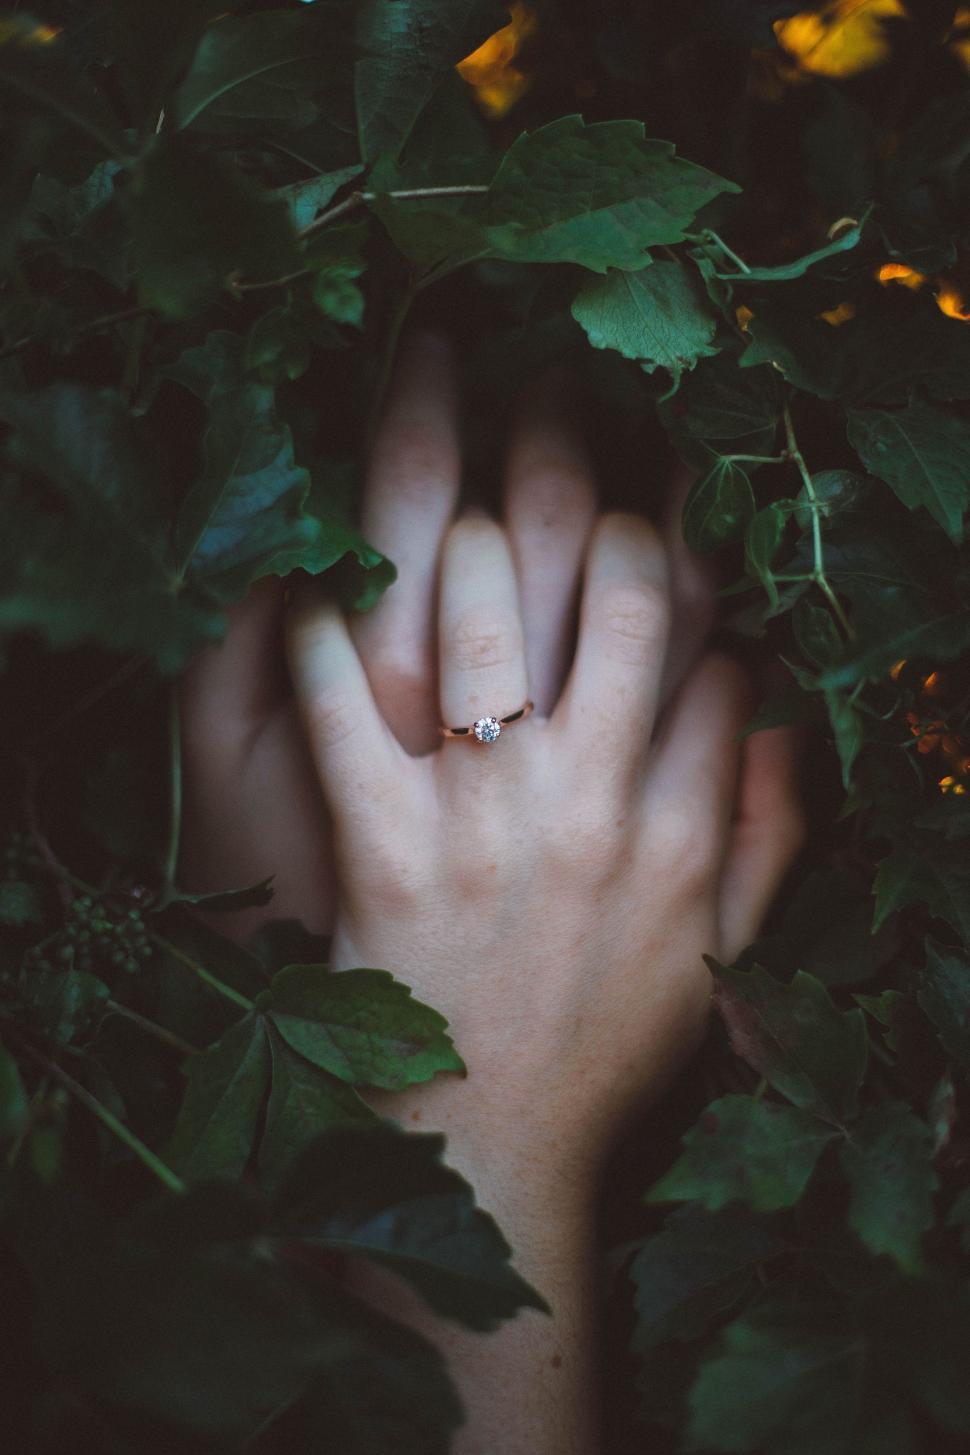 Free Image of Hand With Ring Surrounded by Leaves 